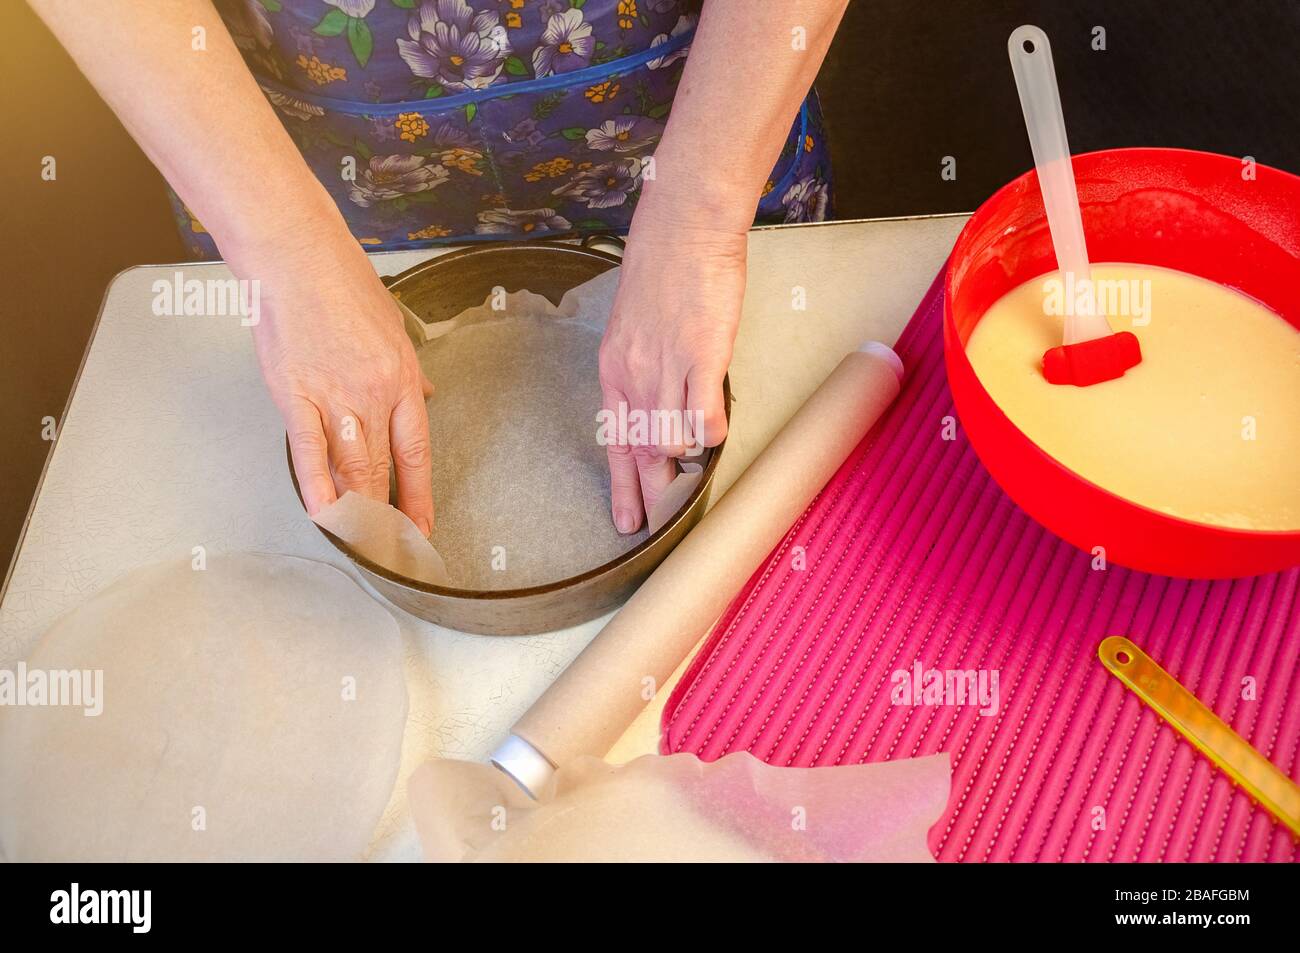 Baking Ingredients and Utensils for Cooking Sponge Cake. Process Cooking Sponge Cake. Woman Puts Parchment Paper on the bottom of the Bakeware. Stock Photo